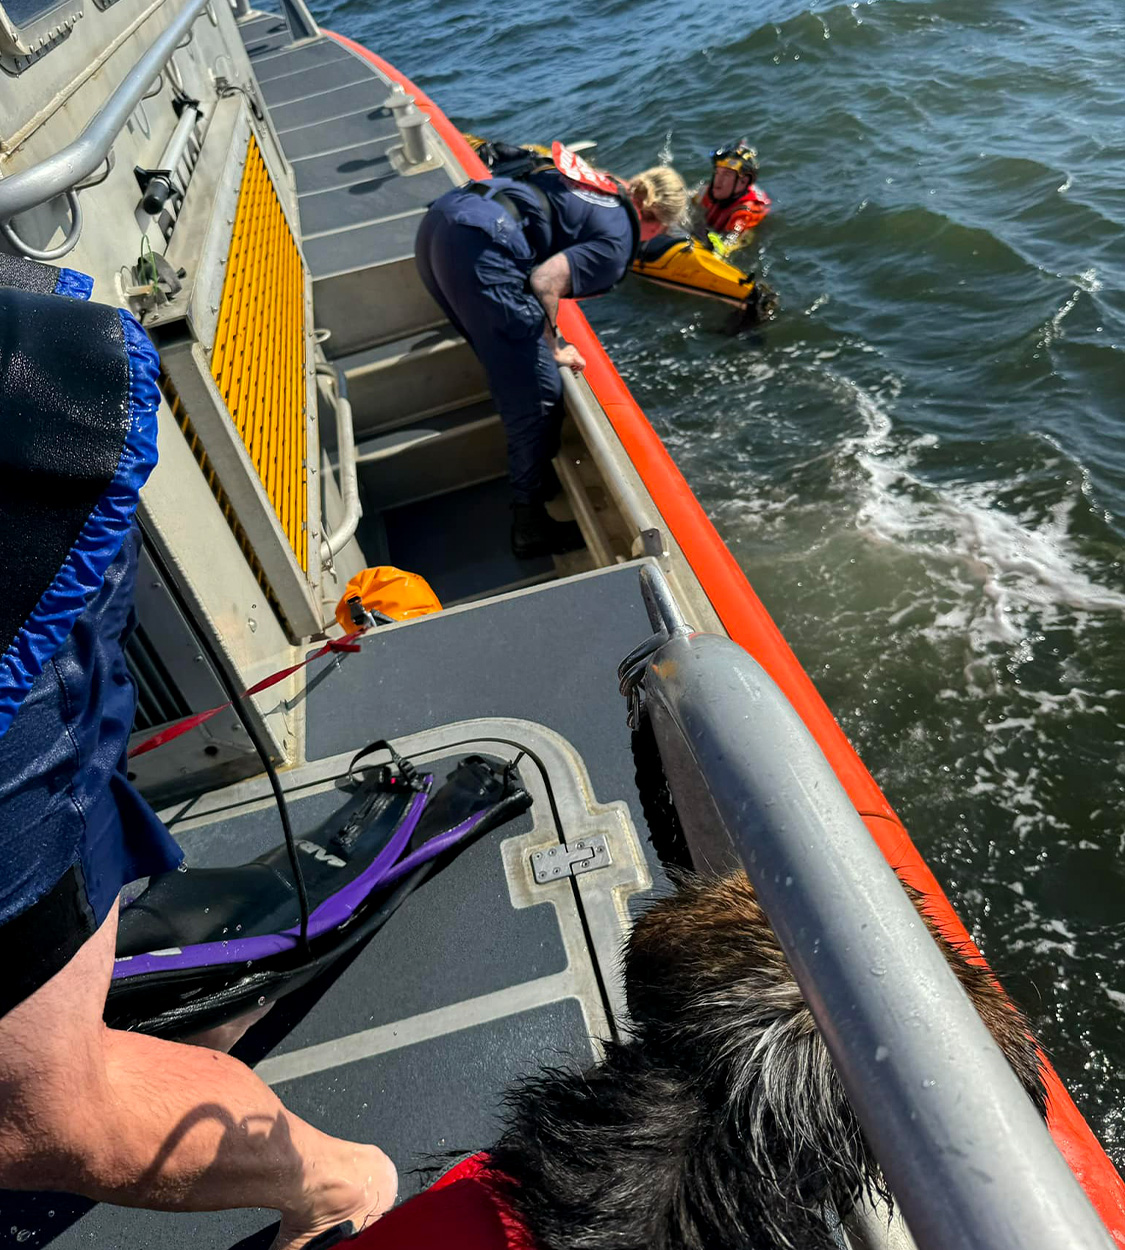 Coast guard rescues kayakers in bay.